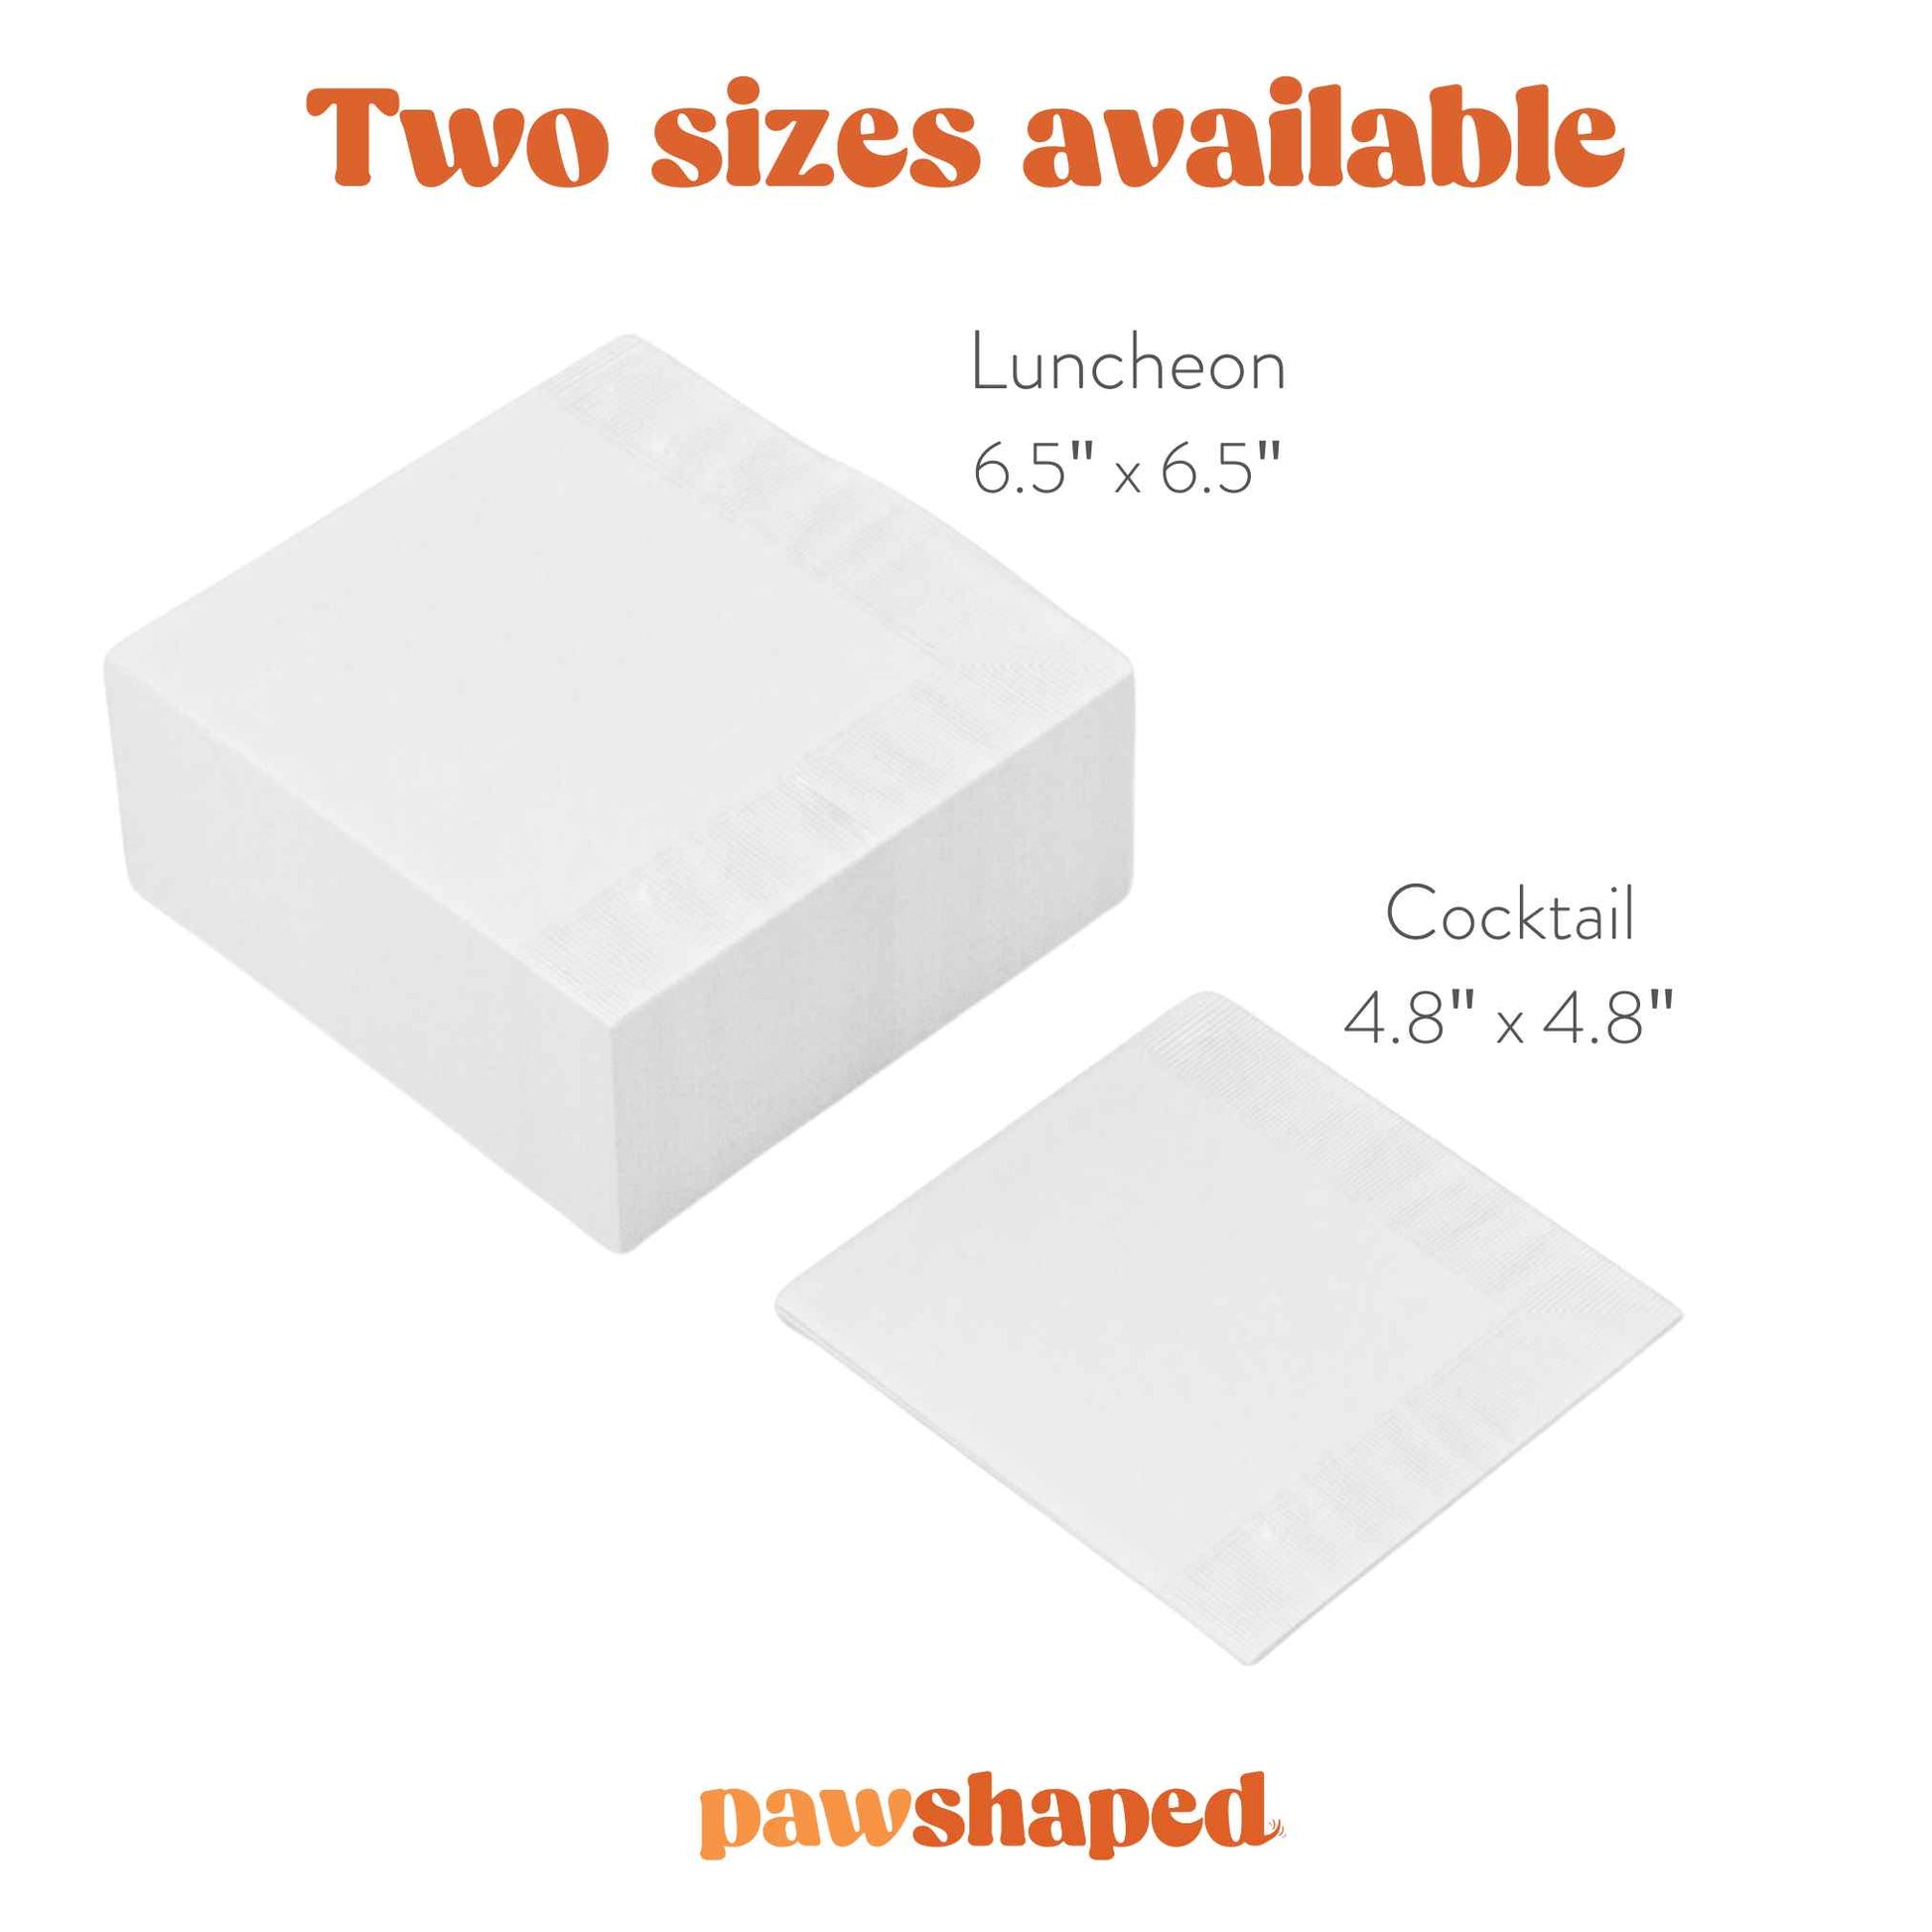 size chart of two different napkin luncheon, cocktail